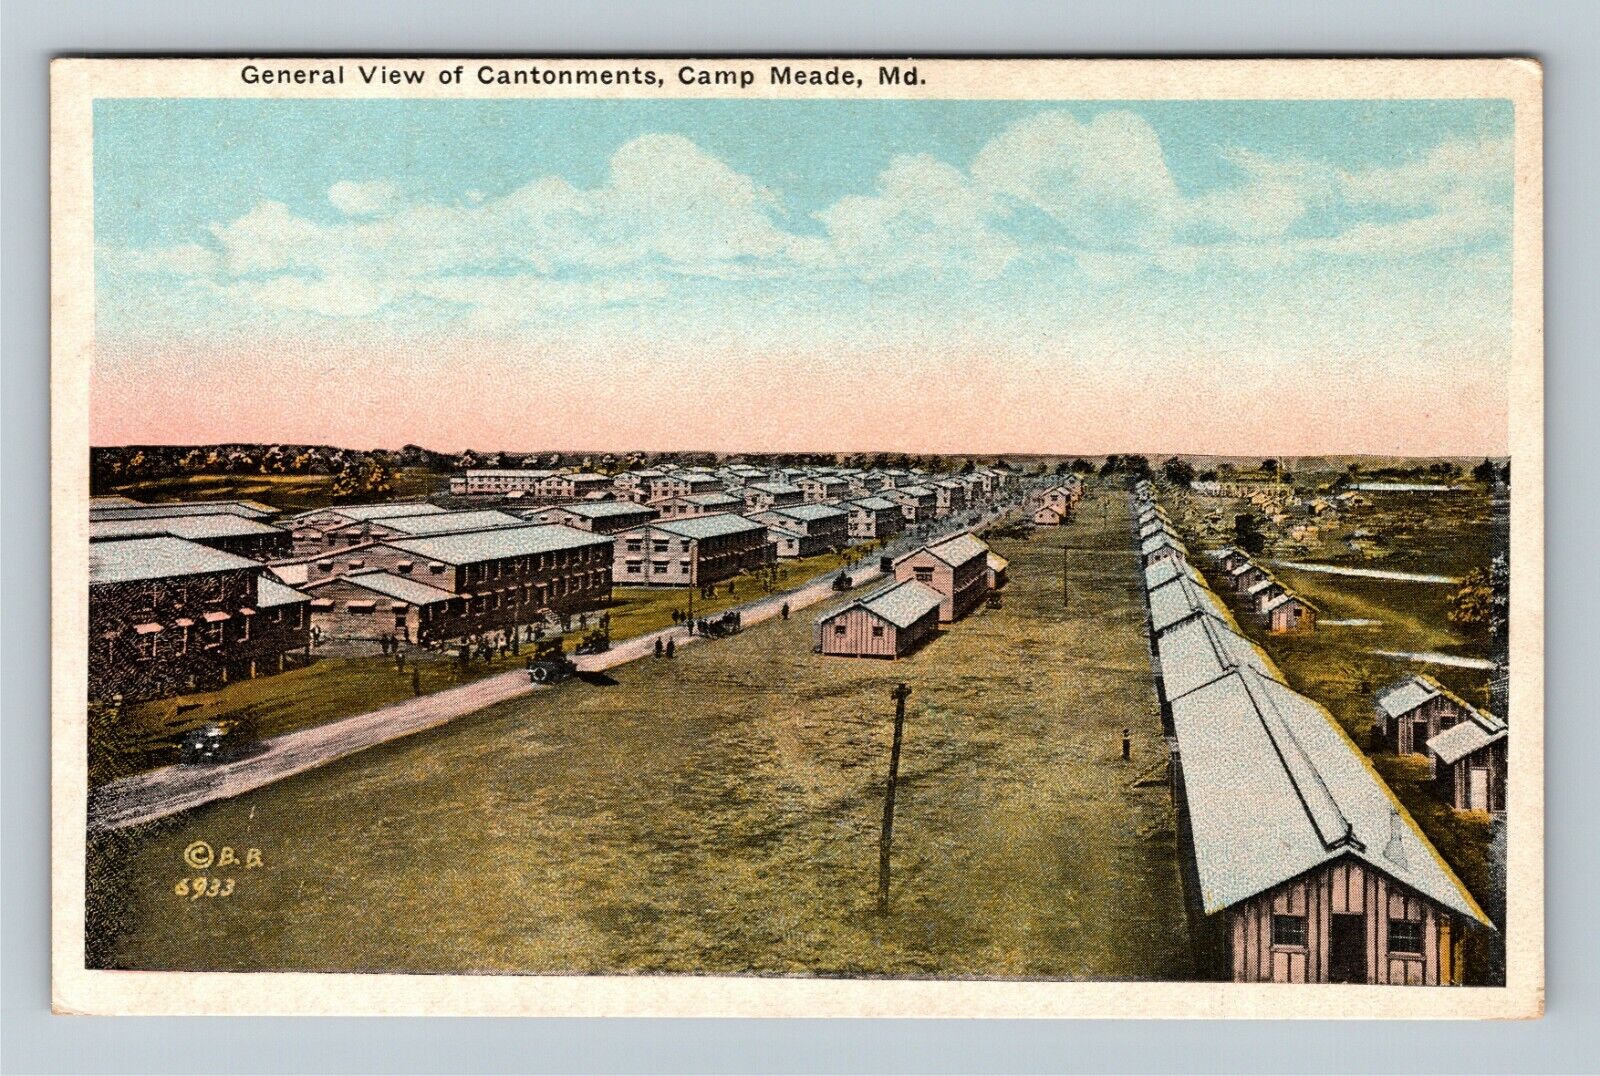 Camp Meade, MD-Maryland, General View Cantonments, Vintage Postcard